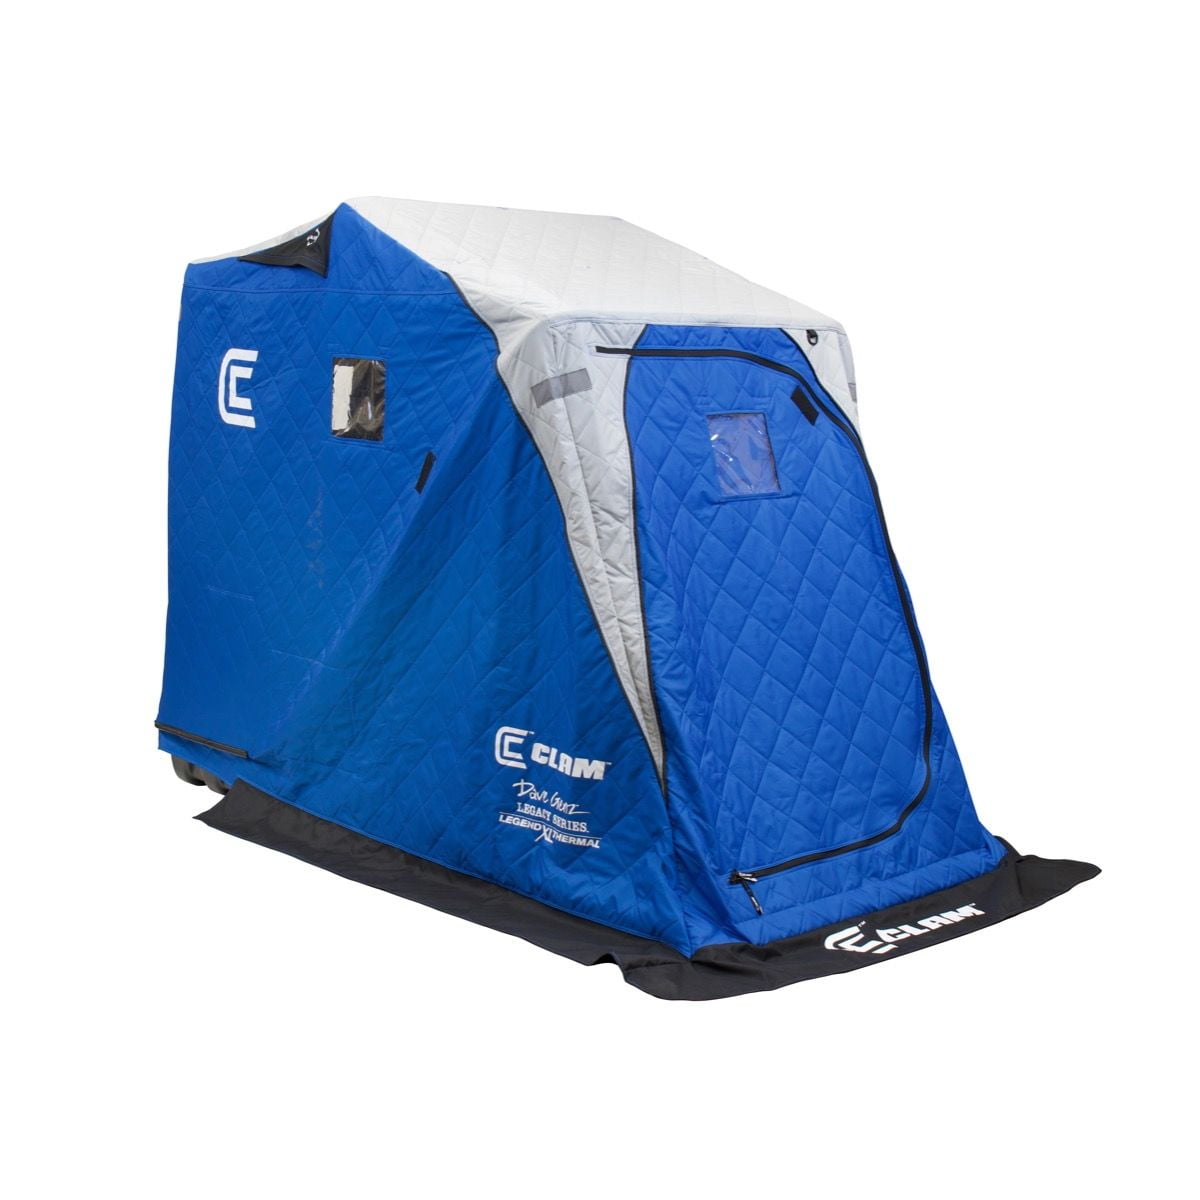 CLAM 12564 Legend XL Thermal Ice Fishing Shelter with Deluxe Swivel Seat 